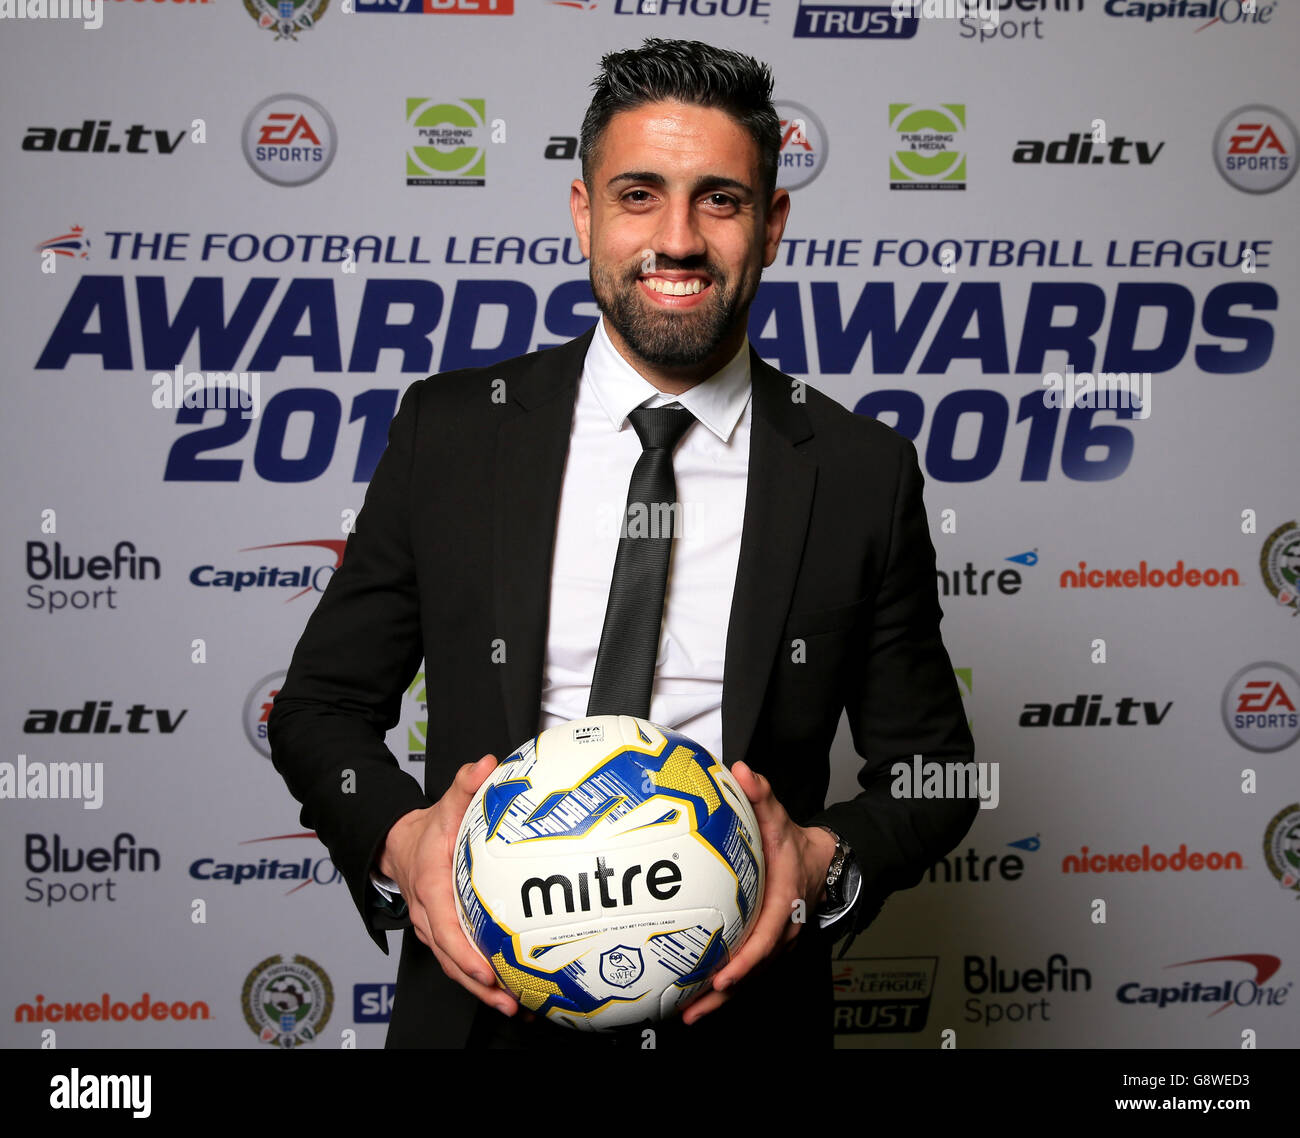 The Football League Awards 2016 - Manchester Central - Manchester. Sheffield Wednesday's Marco Matias receives the Mitre Goal of the Year at tonight's Football League Awards held in Manchester. Stock Photo